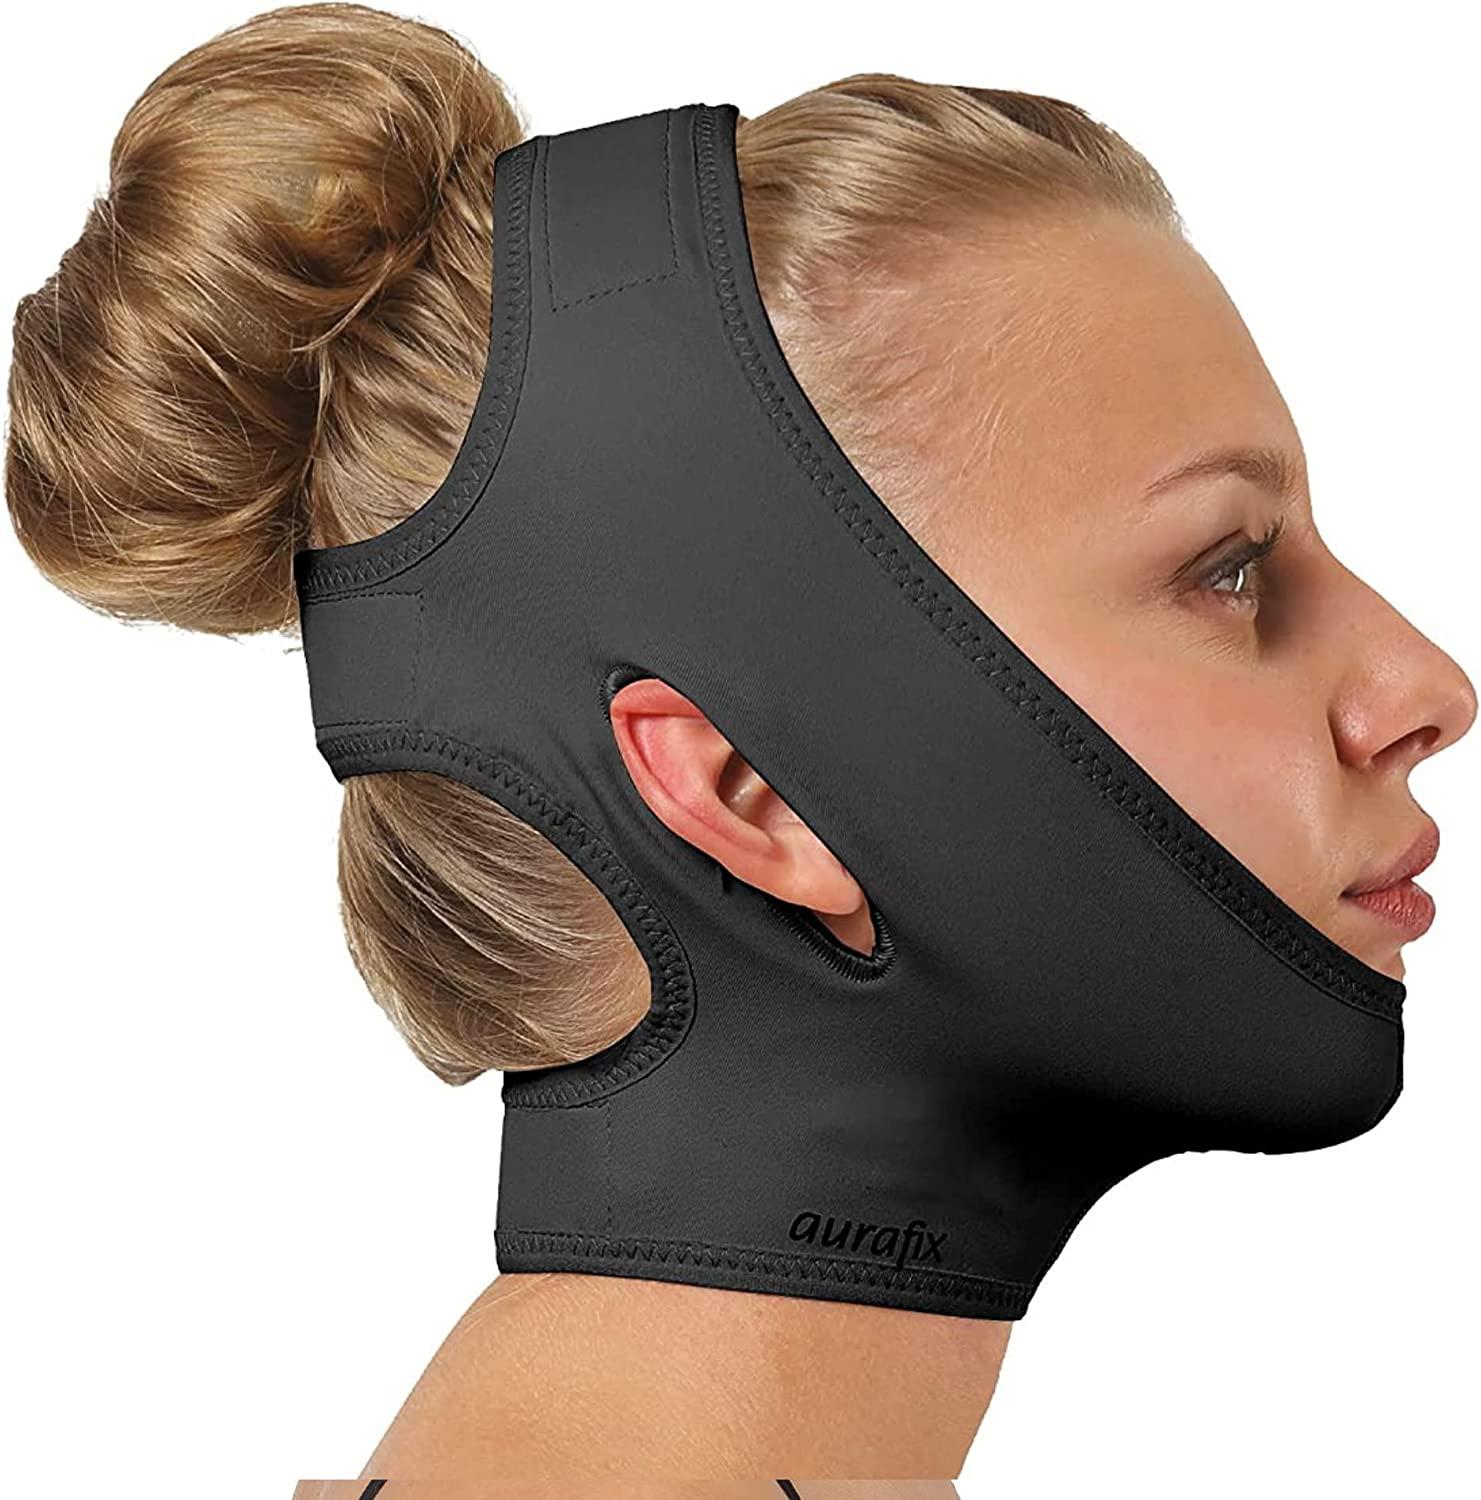 LIPOELASTIC- FM extra- Post Surgical Chin and Neck Lifting Compression Mask  for Women and Men with Velcro fastener, Jowl Tightening (White, XS)